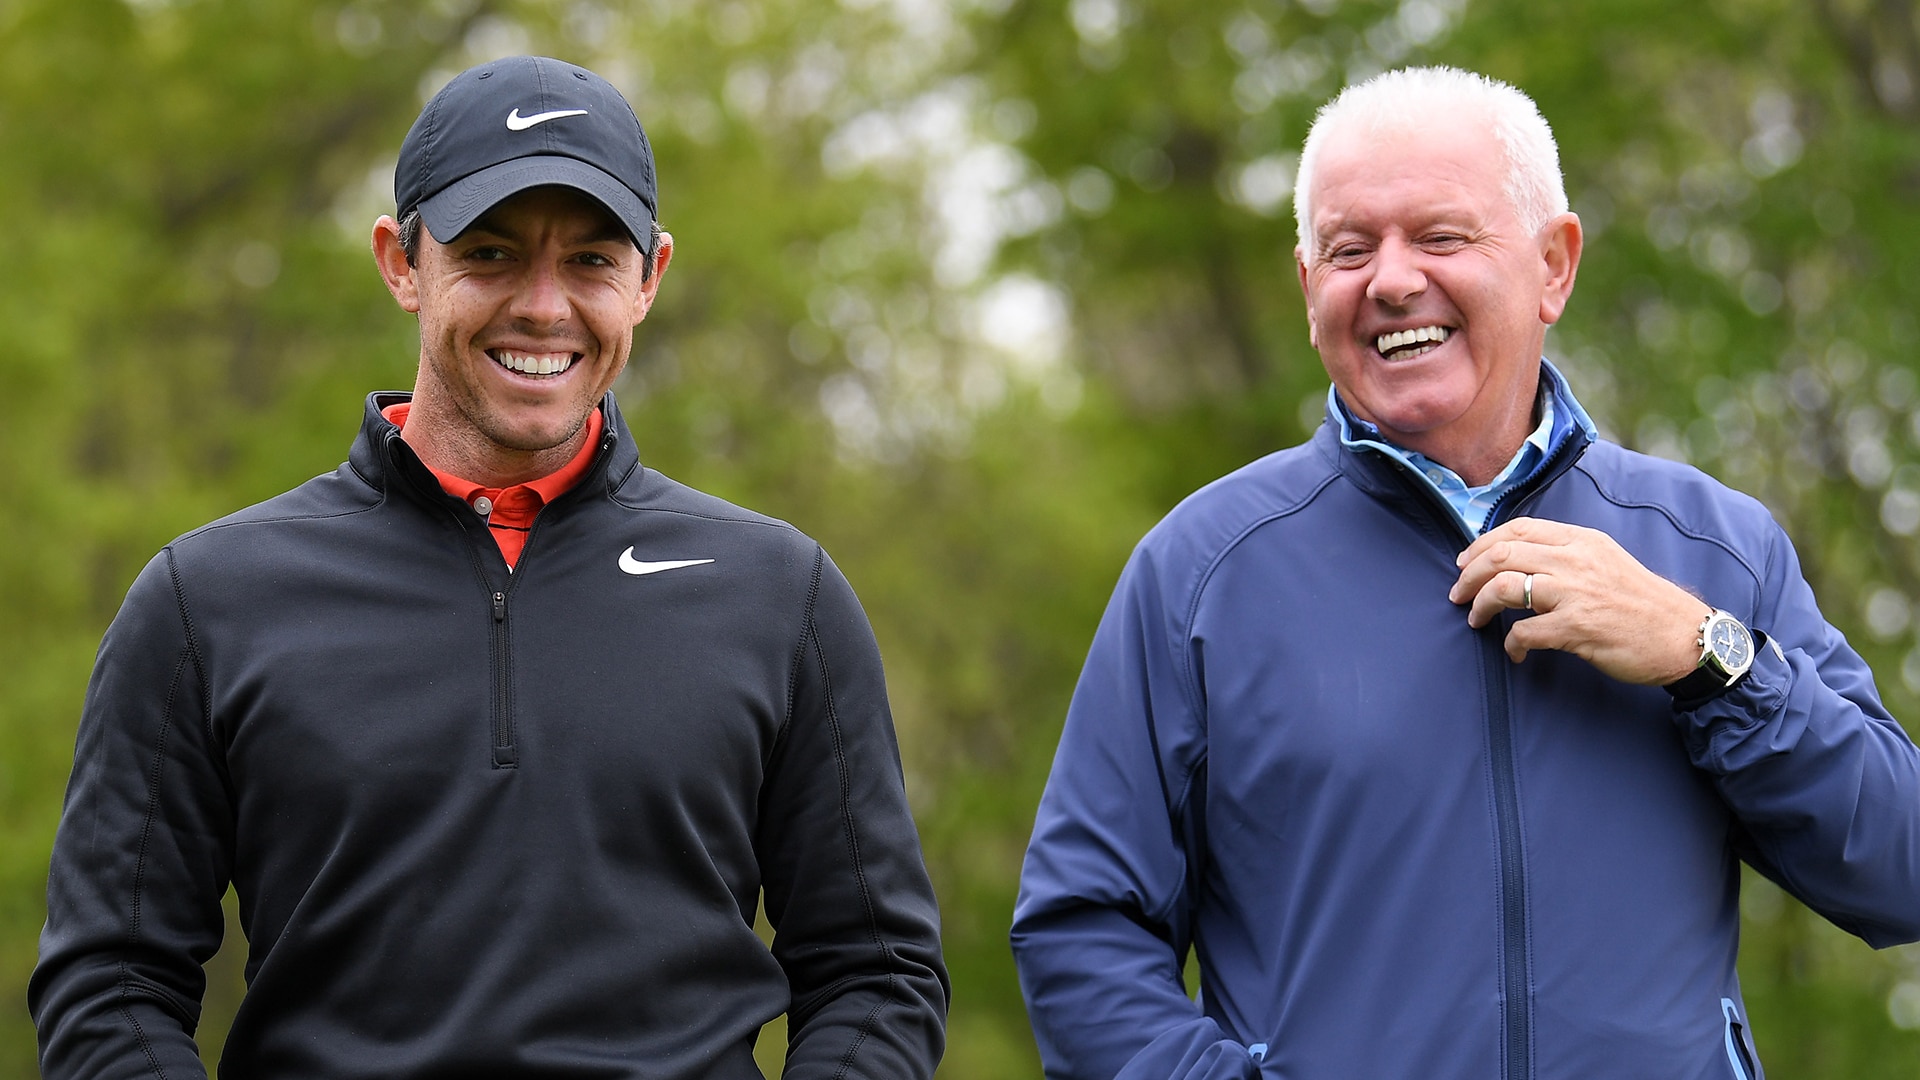 2020 Masters: Rory McIlroy savors Augusta National trips with his dad, even if he sometimes loses